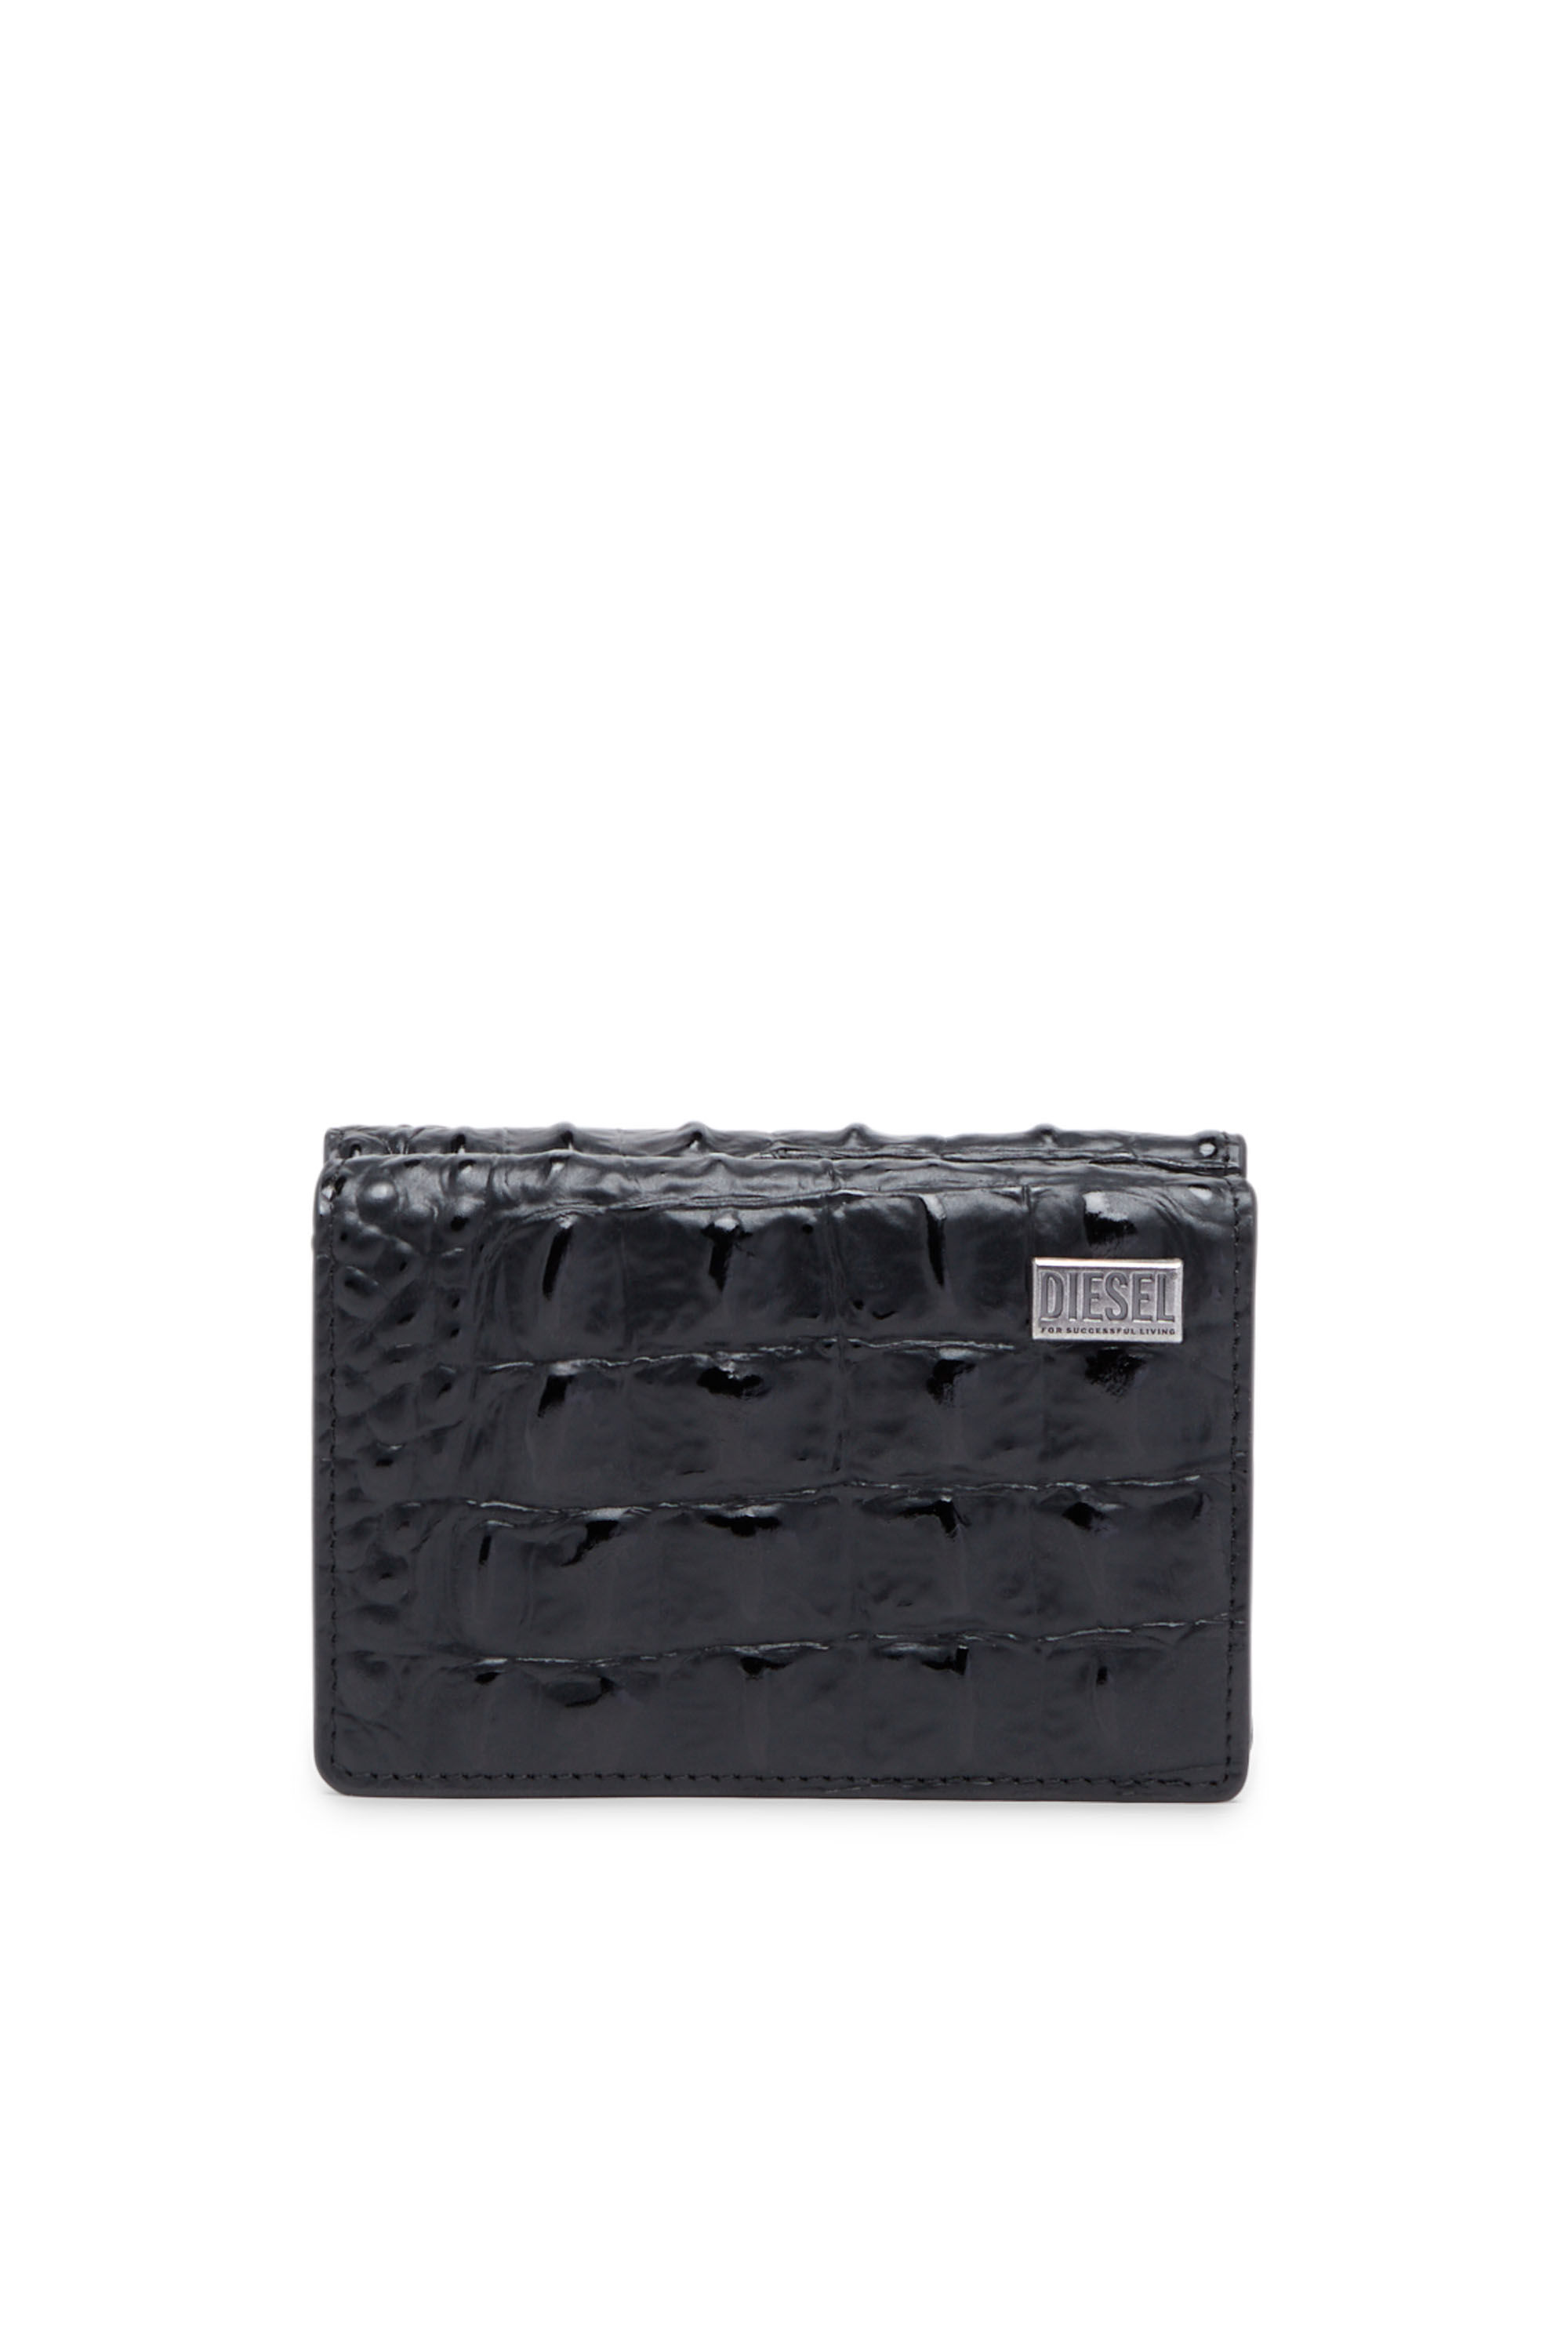 Diesel - TRI-FOLD COIN S, Man Tri-fold wallet in croc-effect leather in Black - Image 1